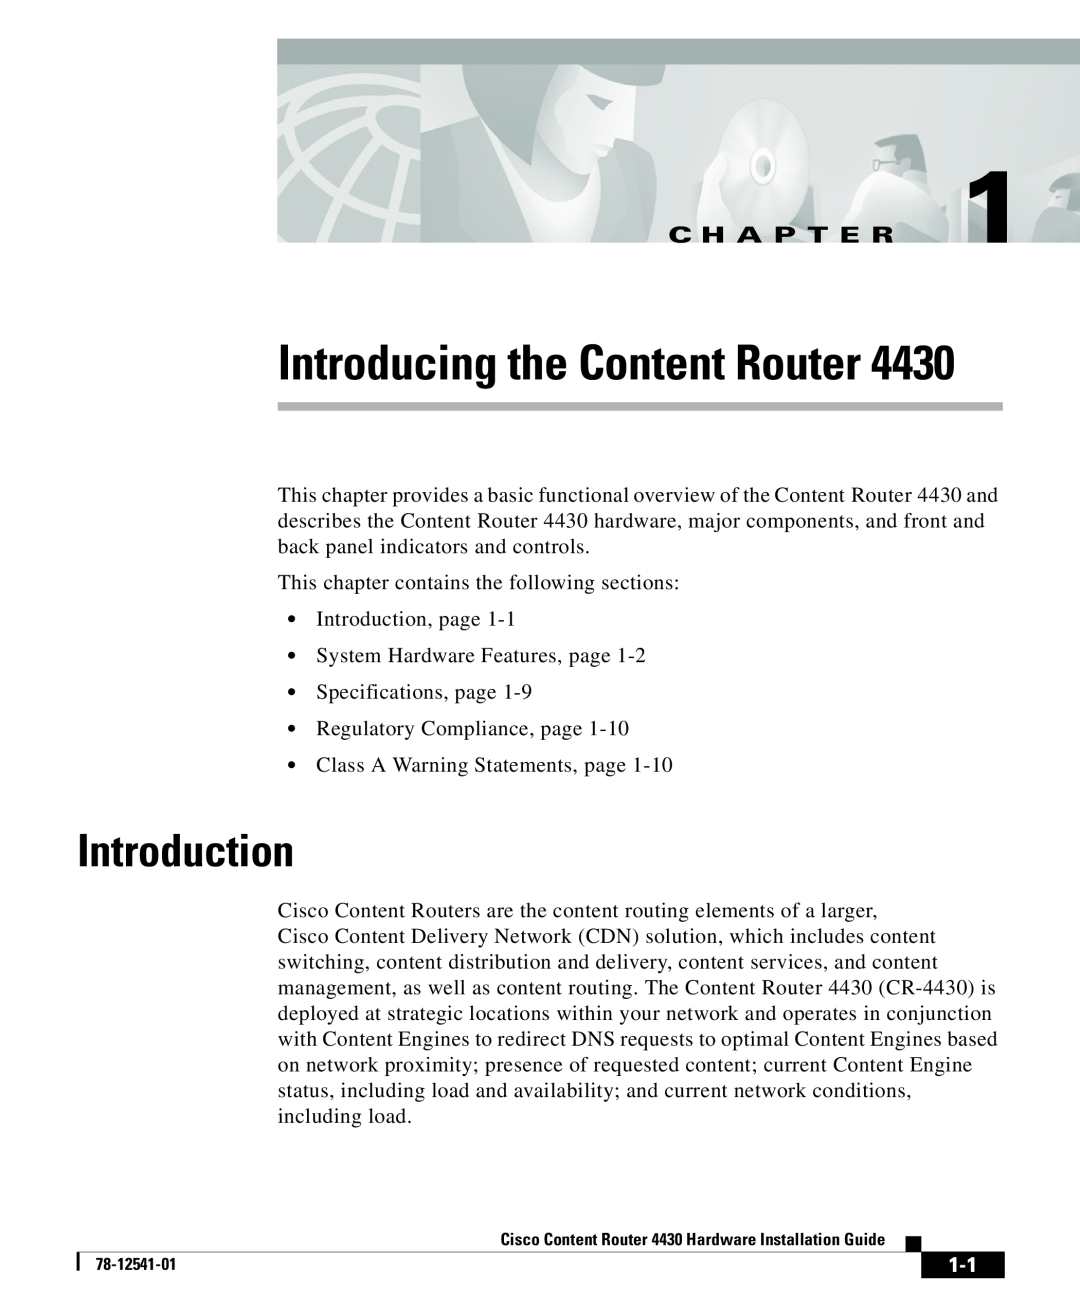 Cisco Systems 4430 specifications Introducing the Content Router, Introduction, C H A P T E R 